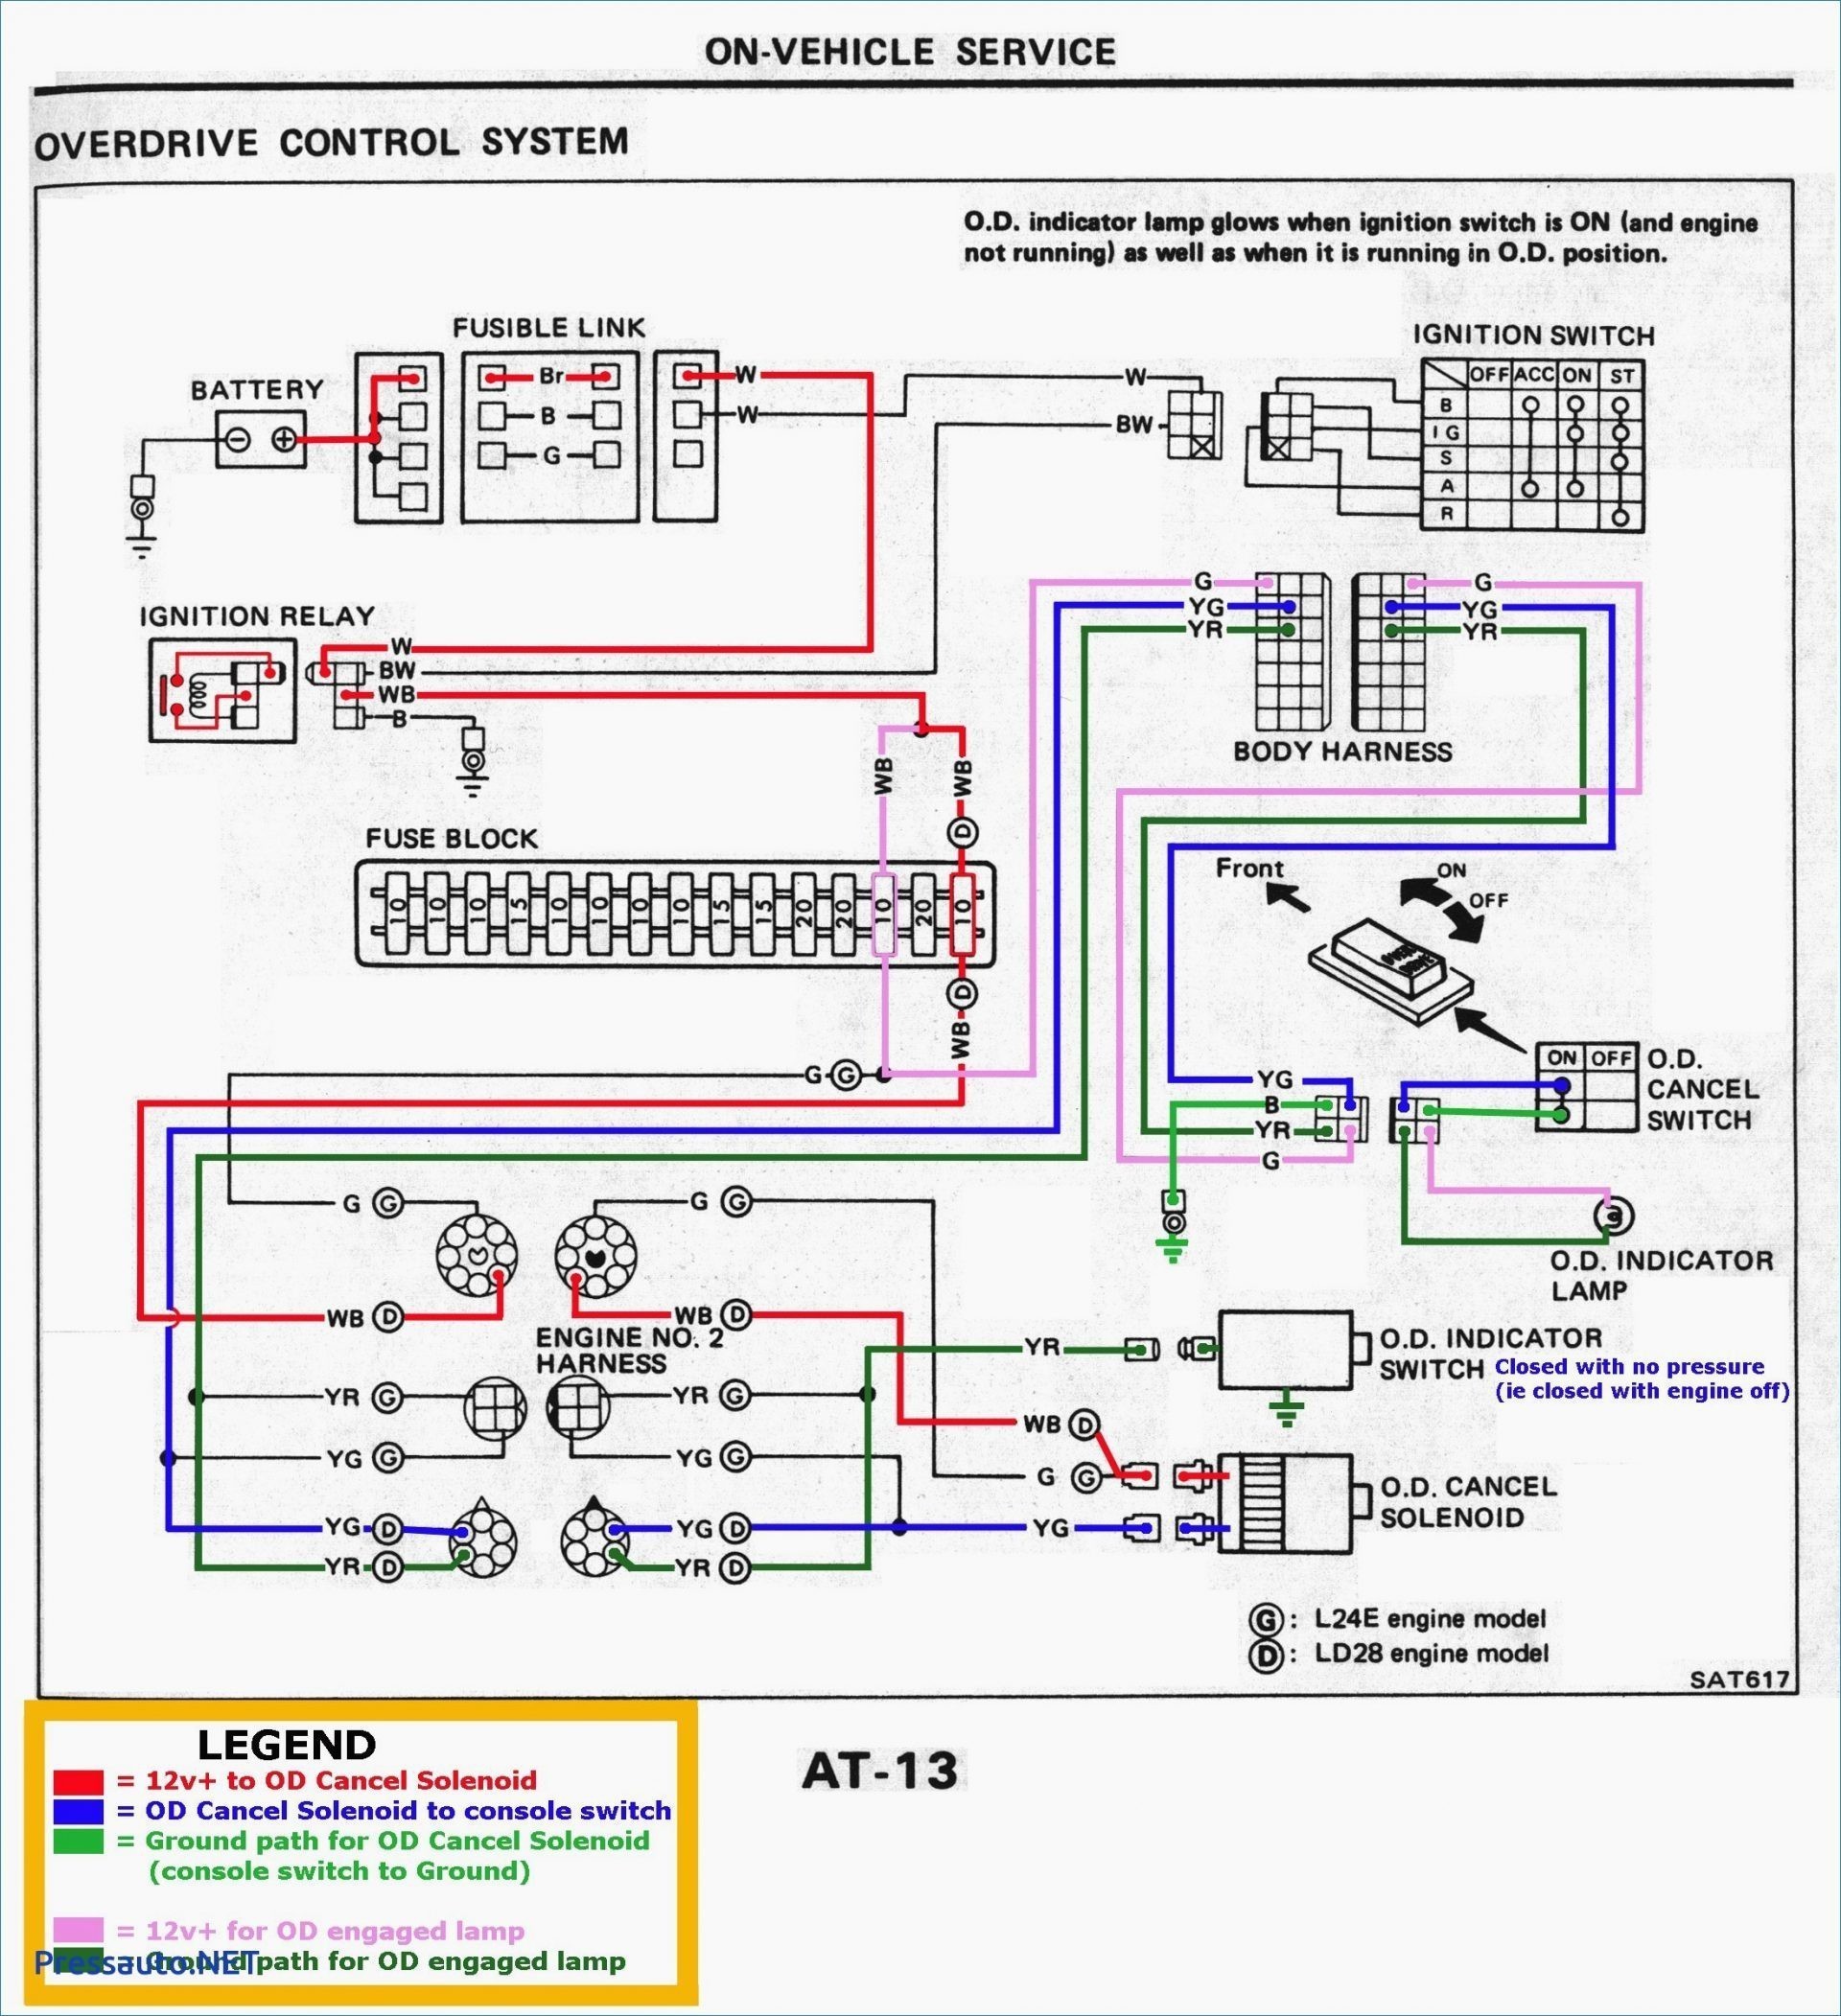 Wiring Diagram for Two Way Light Switch Valid Wiring Diagram 2 Way Lighting Save Wiring Diagram